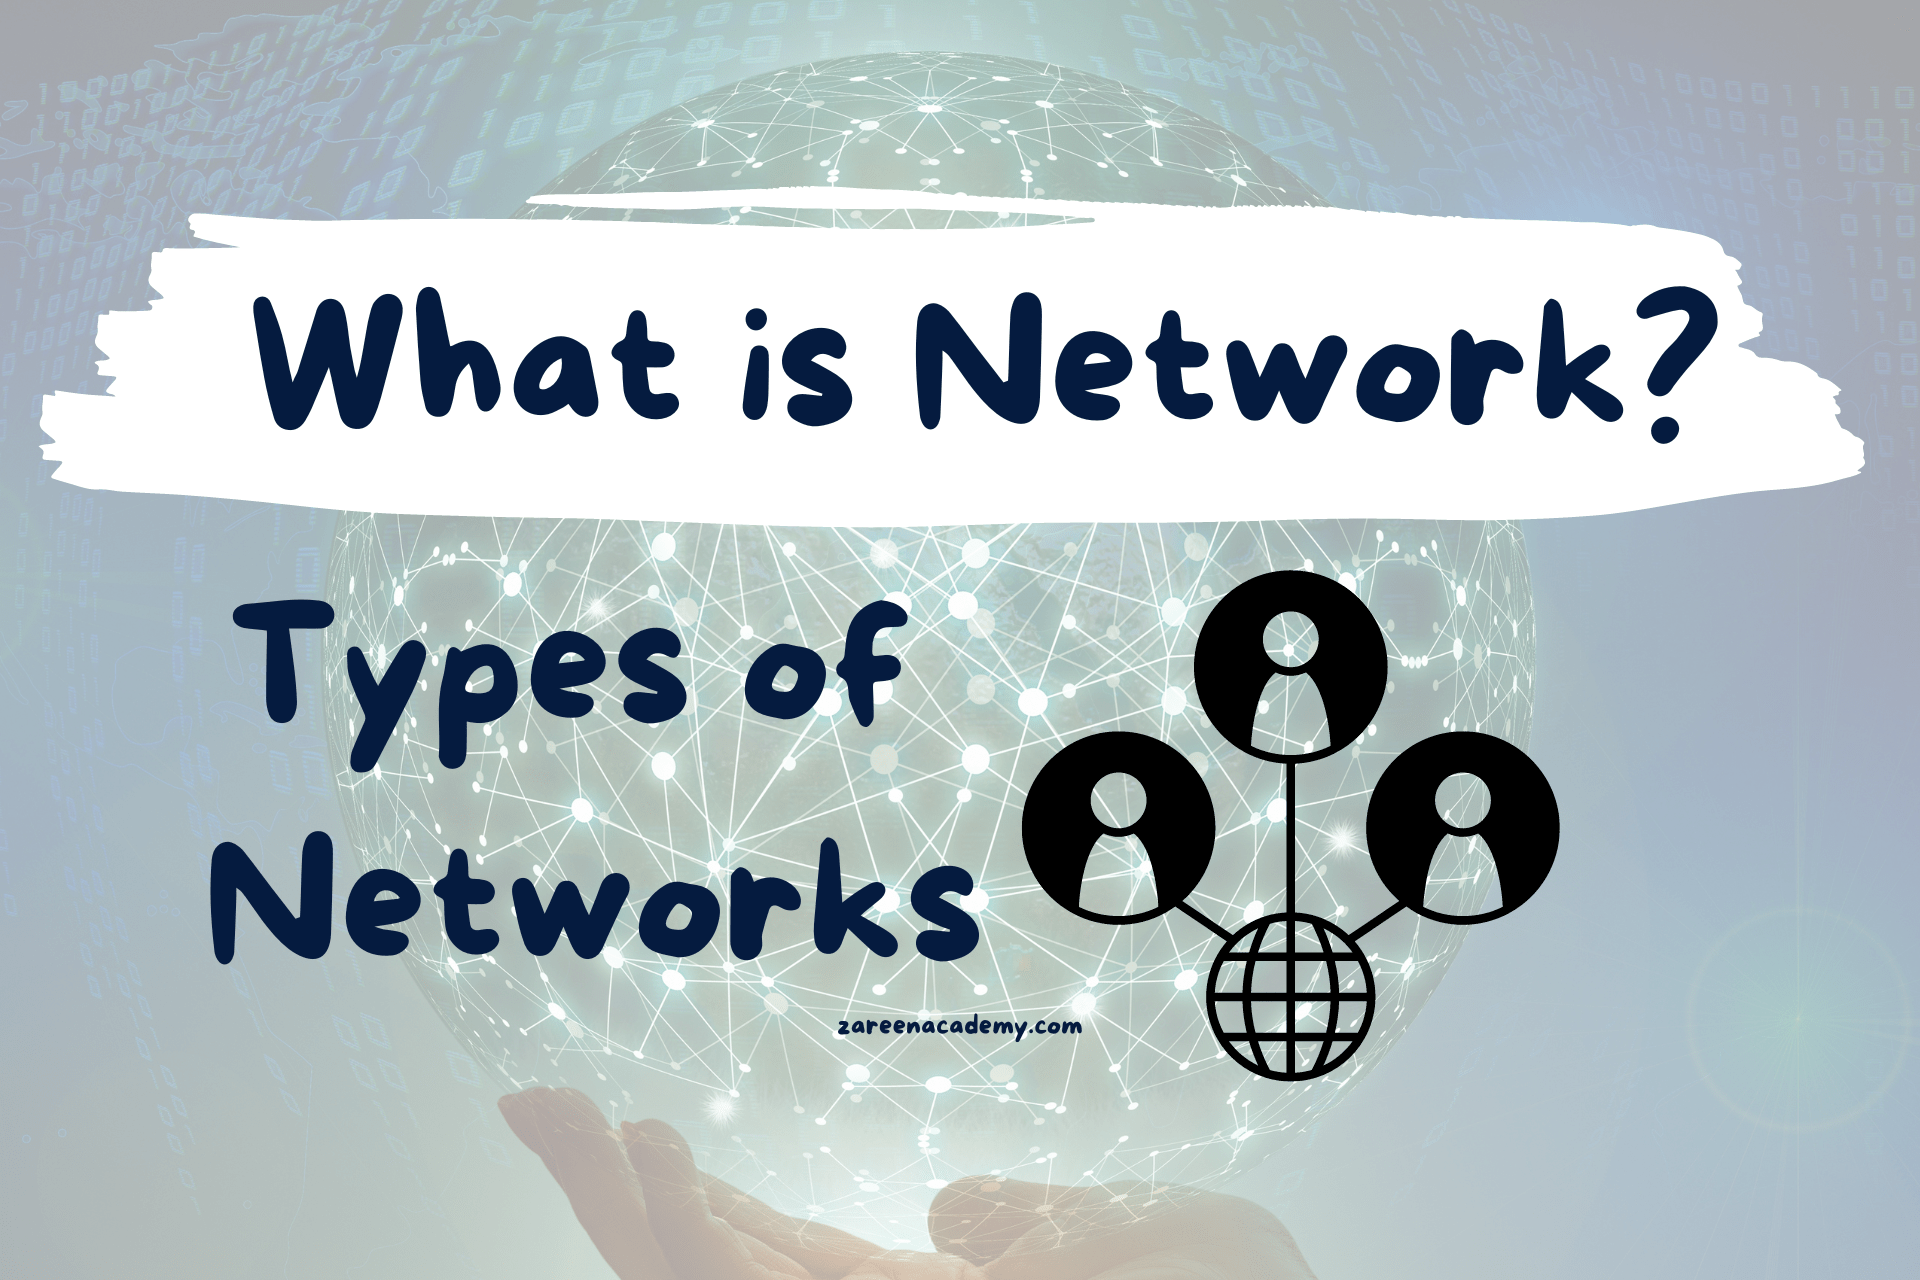 What is Network Best 8 Types of Networks,zareenacademy.com